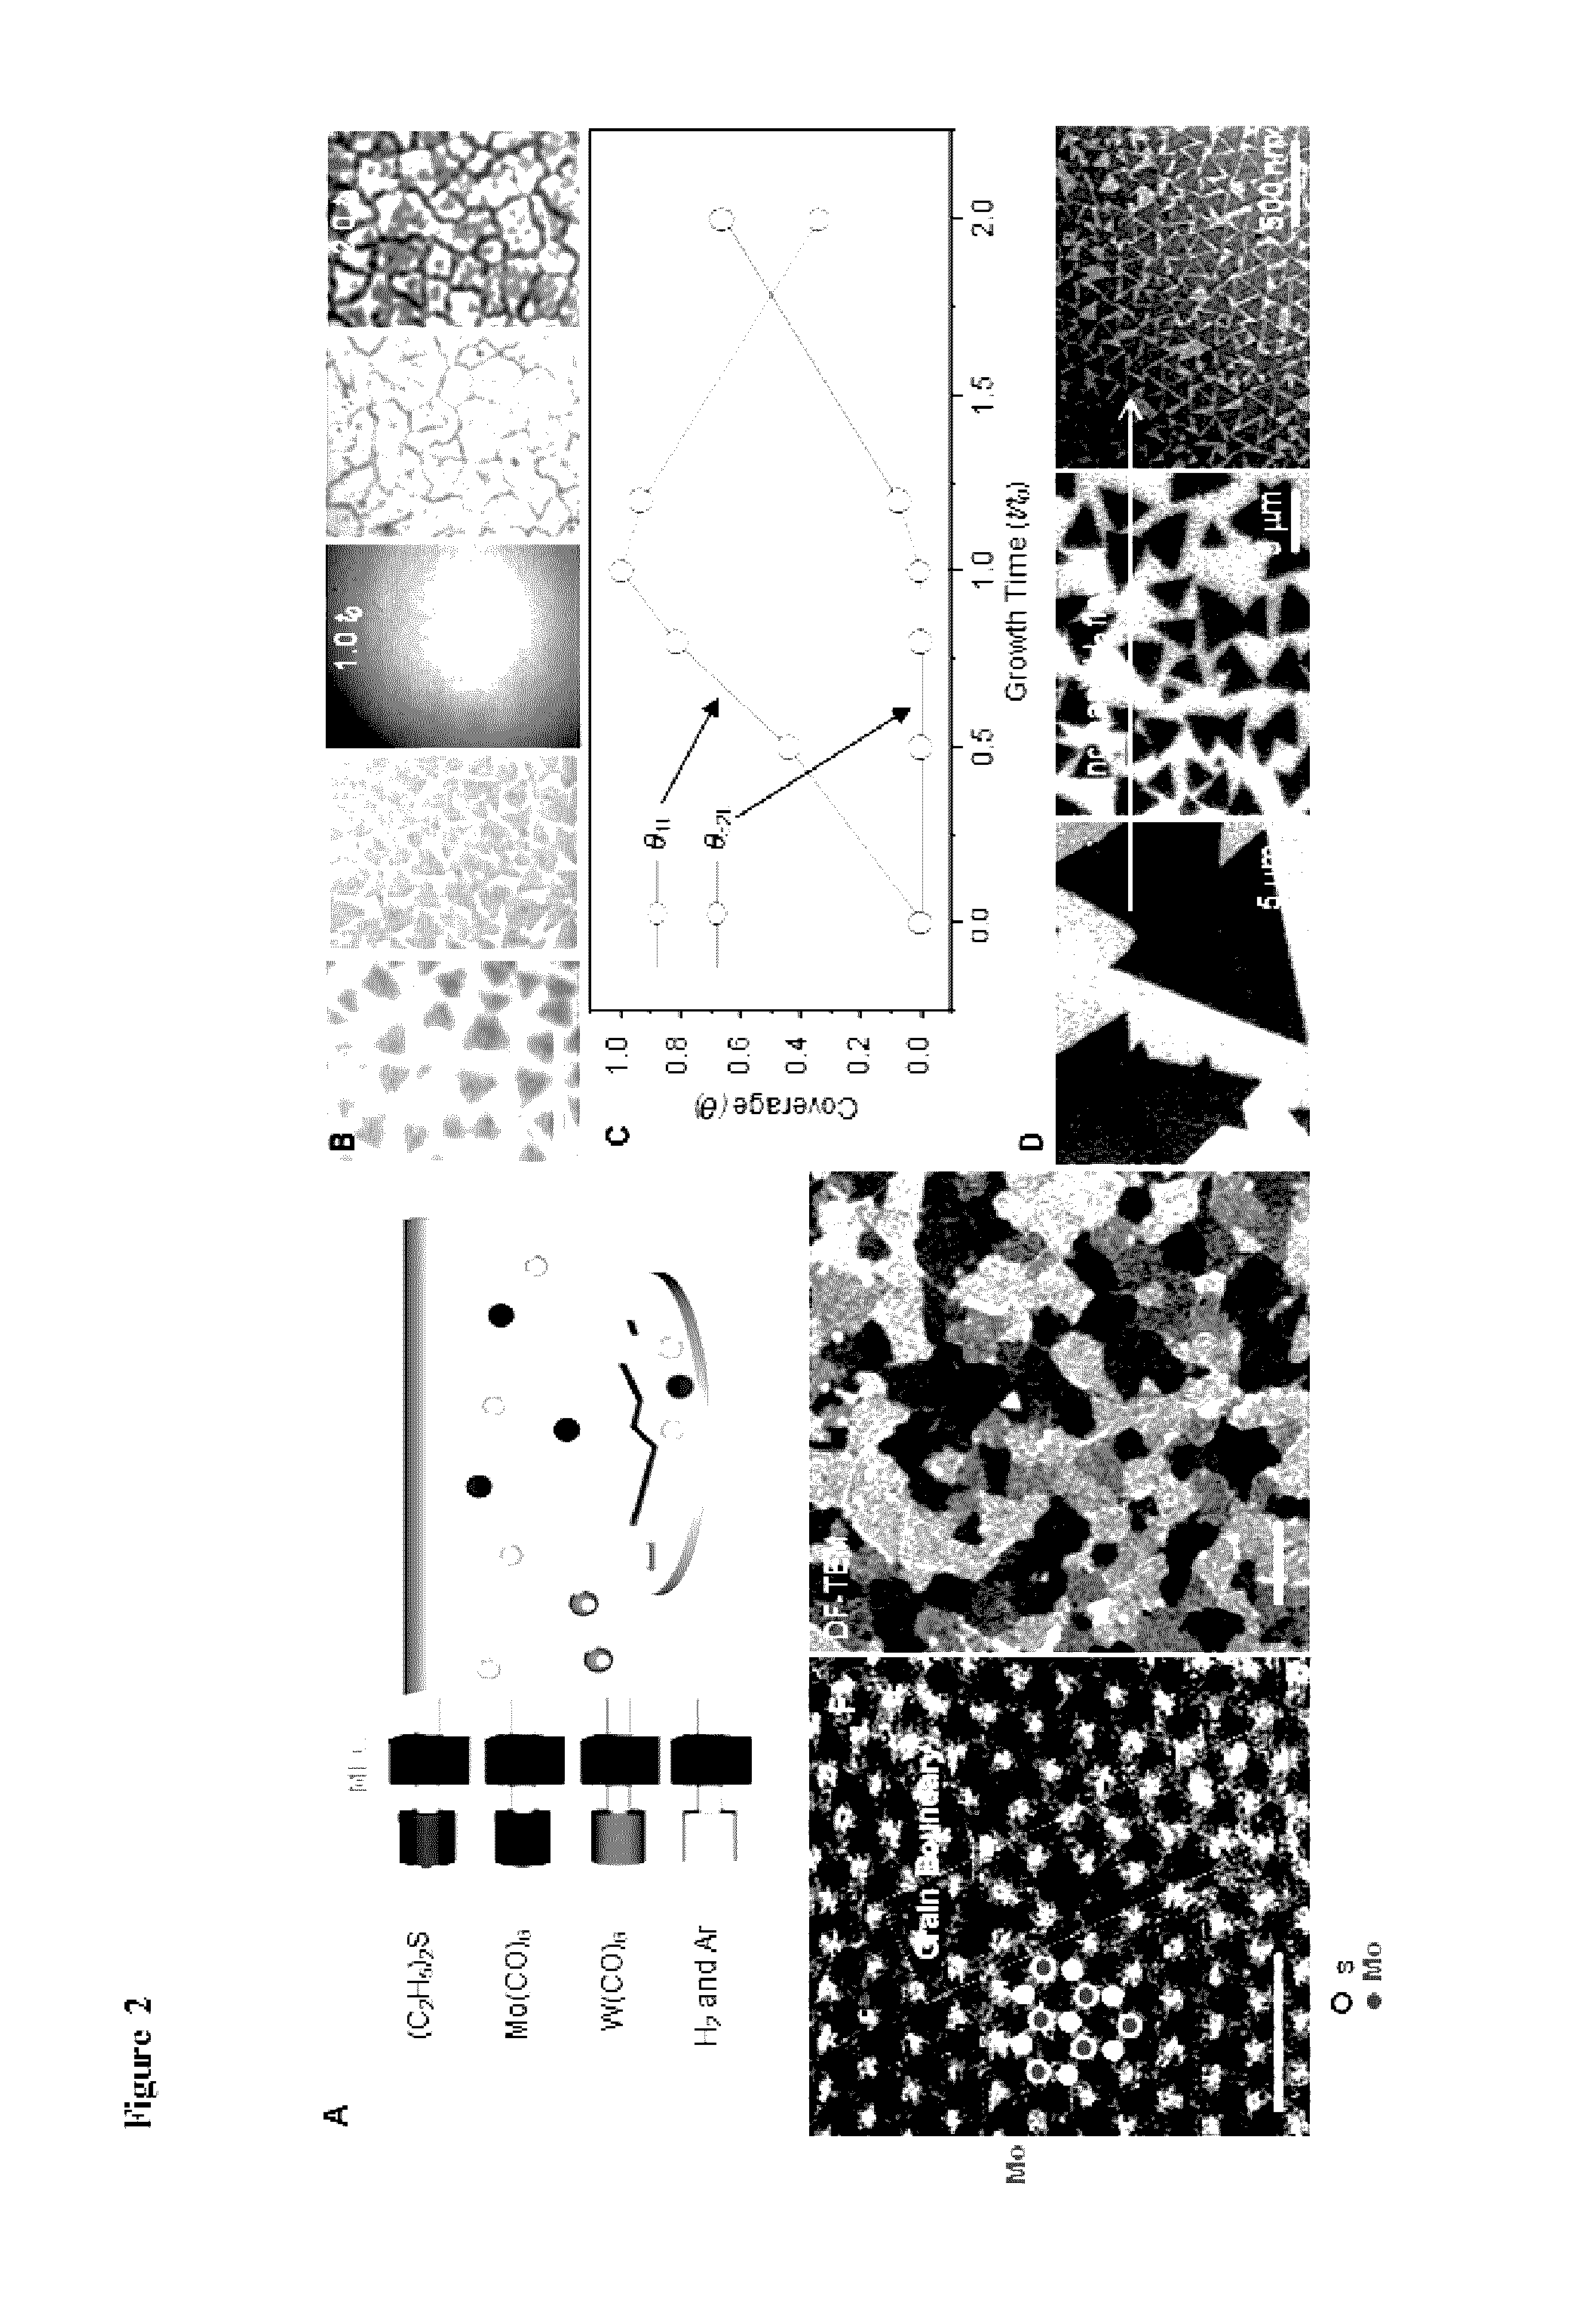 Monolayer films of semiconducting metal dichalcogenides, methods of making same, and uses of same